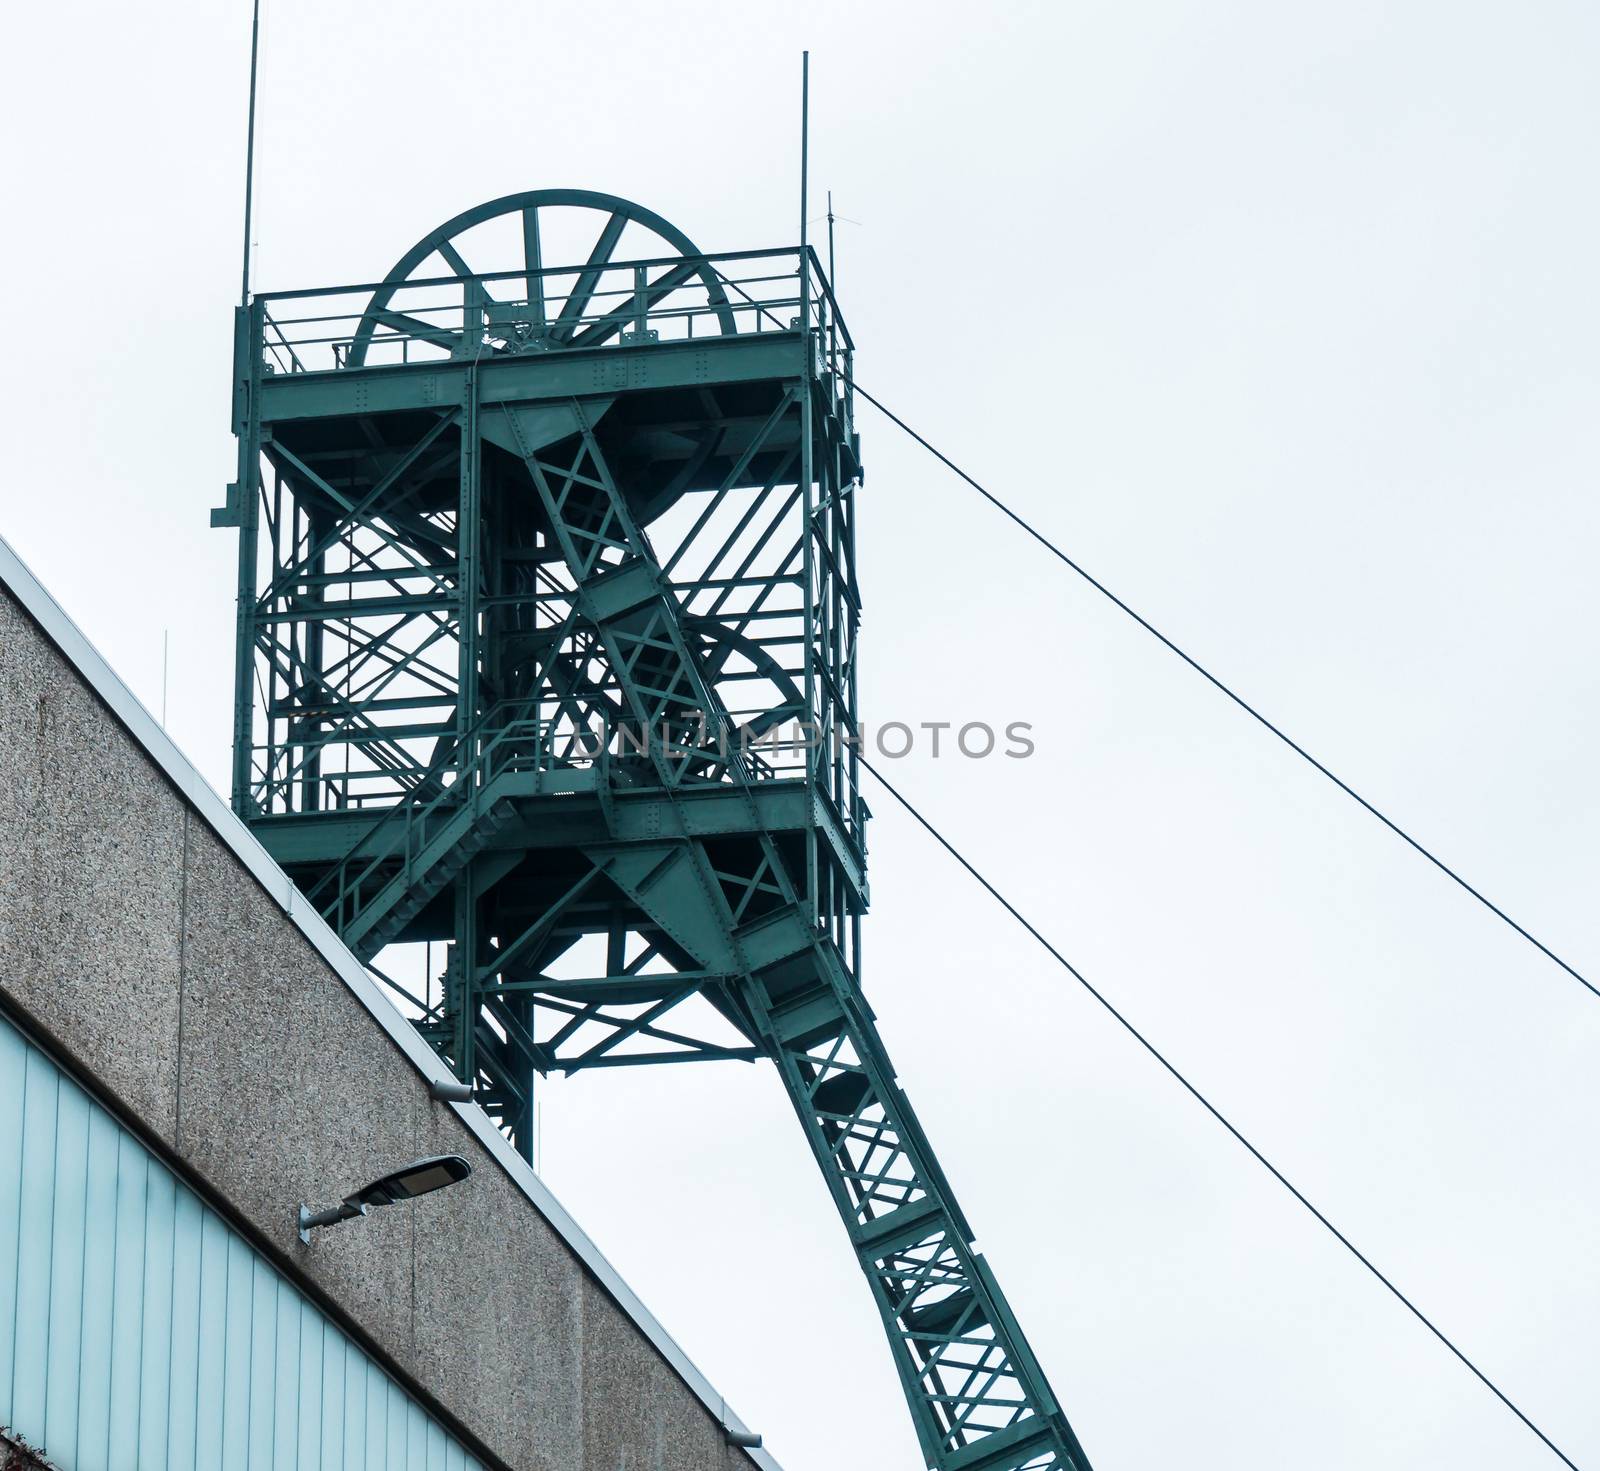 Mining tower of the "Asse" mine, a research mine for radioactive waste near Wolfenbuettel in Lower Saxony Germany by geogif